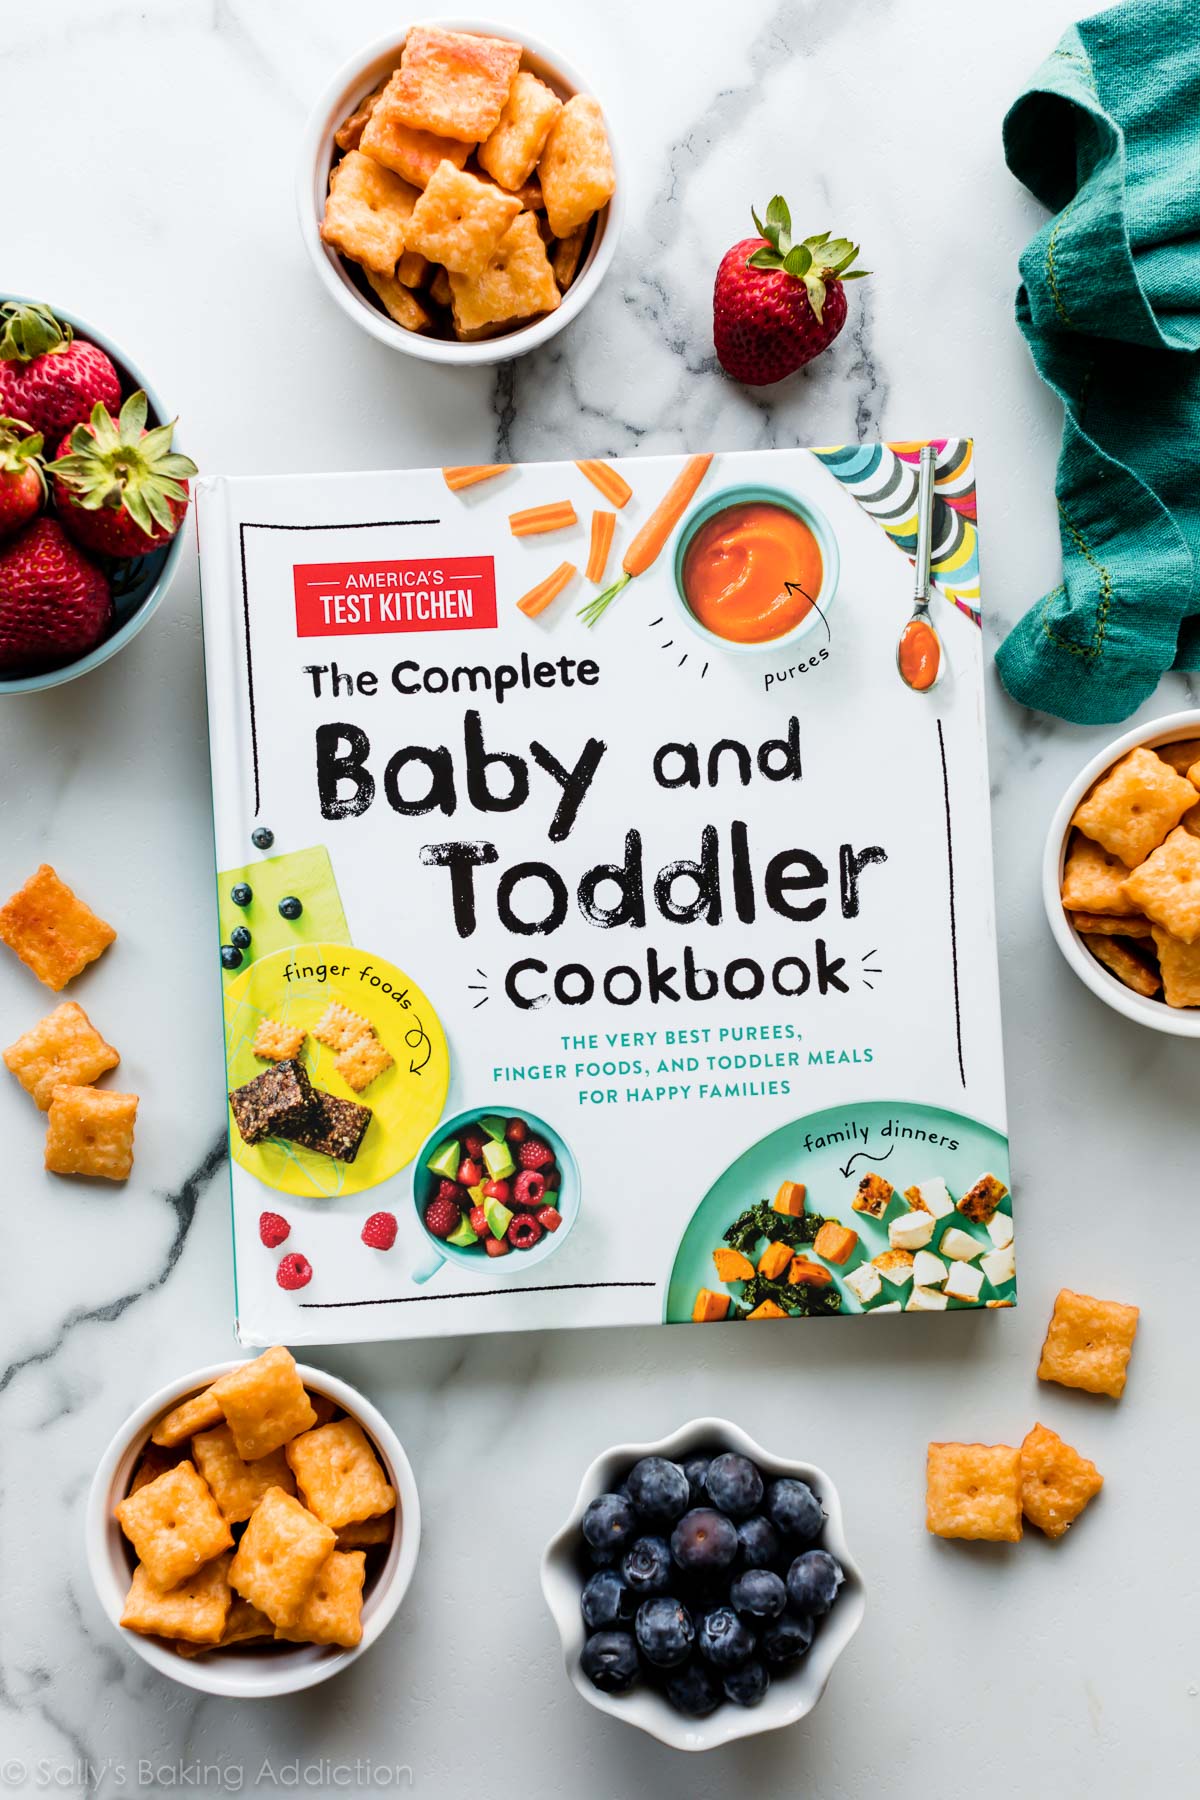 The Complete Baby and Toddler Cookbook par America's Test Kitchen 